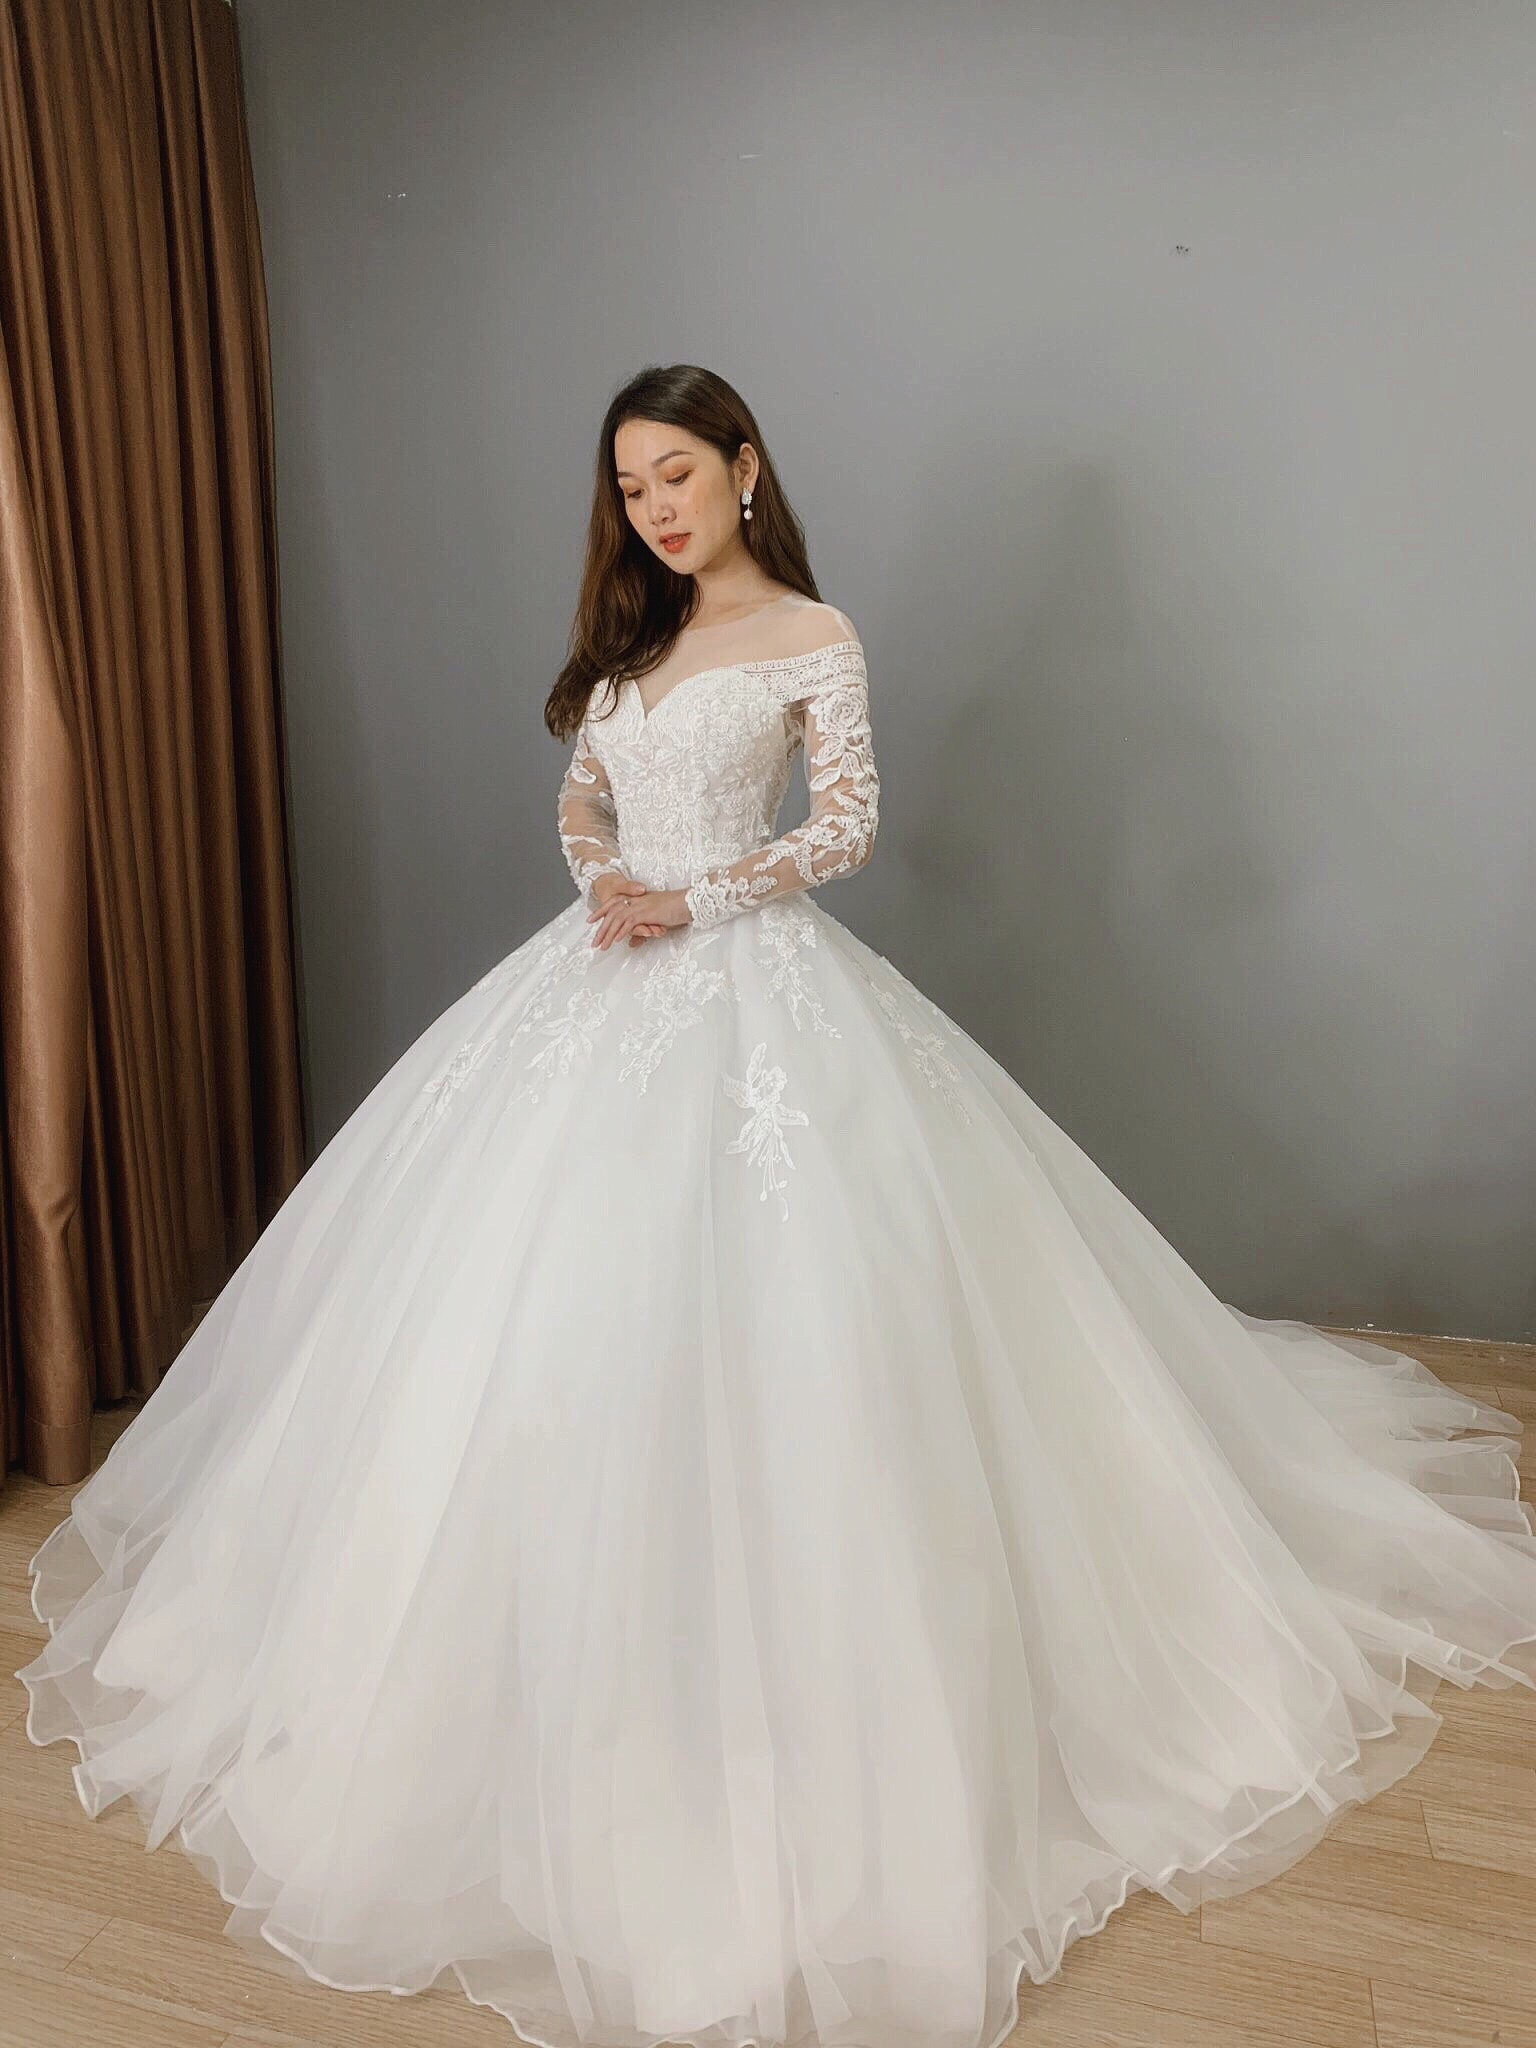 Feminine Long Sleeves Floral Lace White Ball Gown Wedding Dress Various Styles 